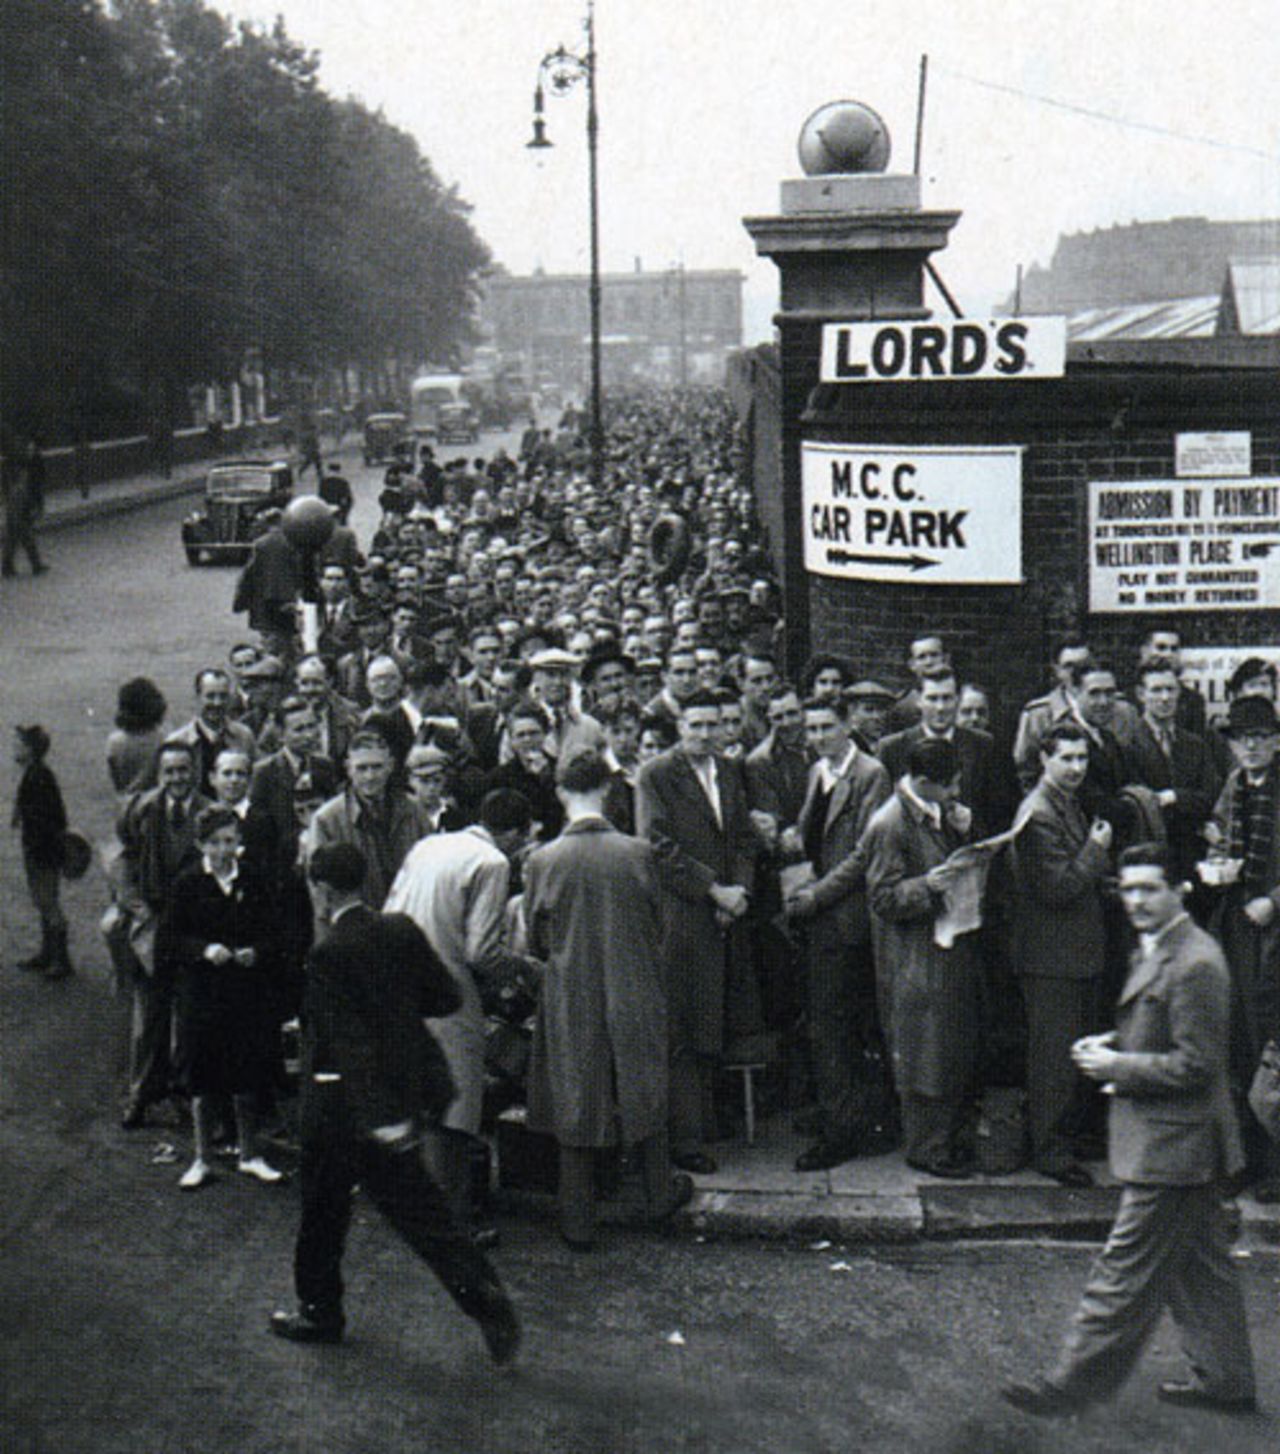 Crowds queue outside Lord's ahead of the 1934 Ashes Test, England v Australia, 2nd Test, Lord's, June 22. 1934